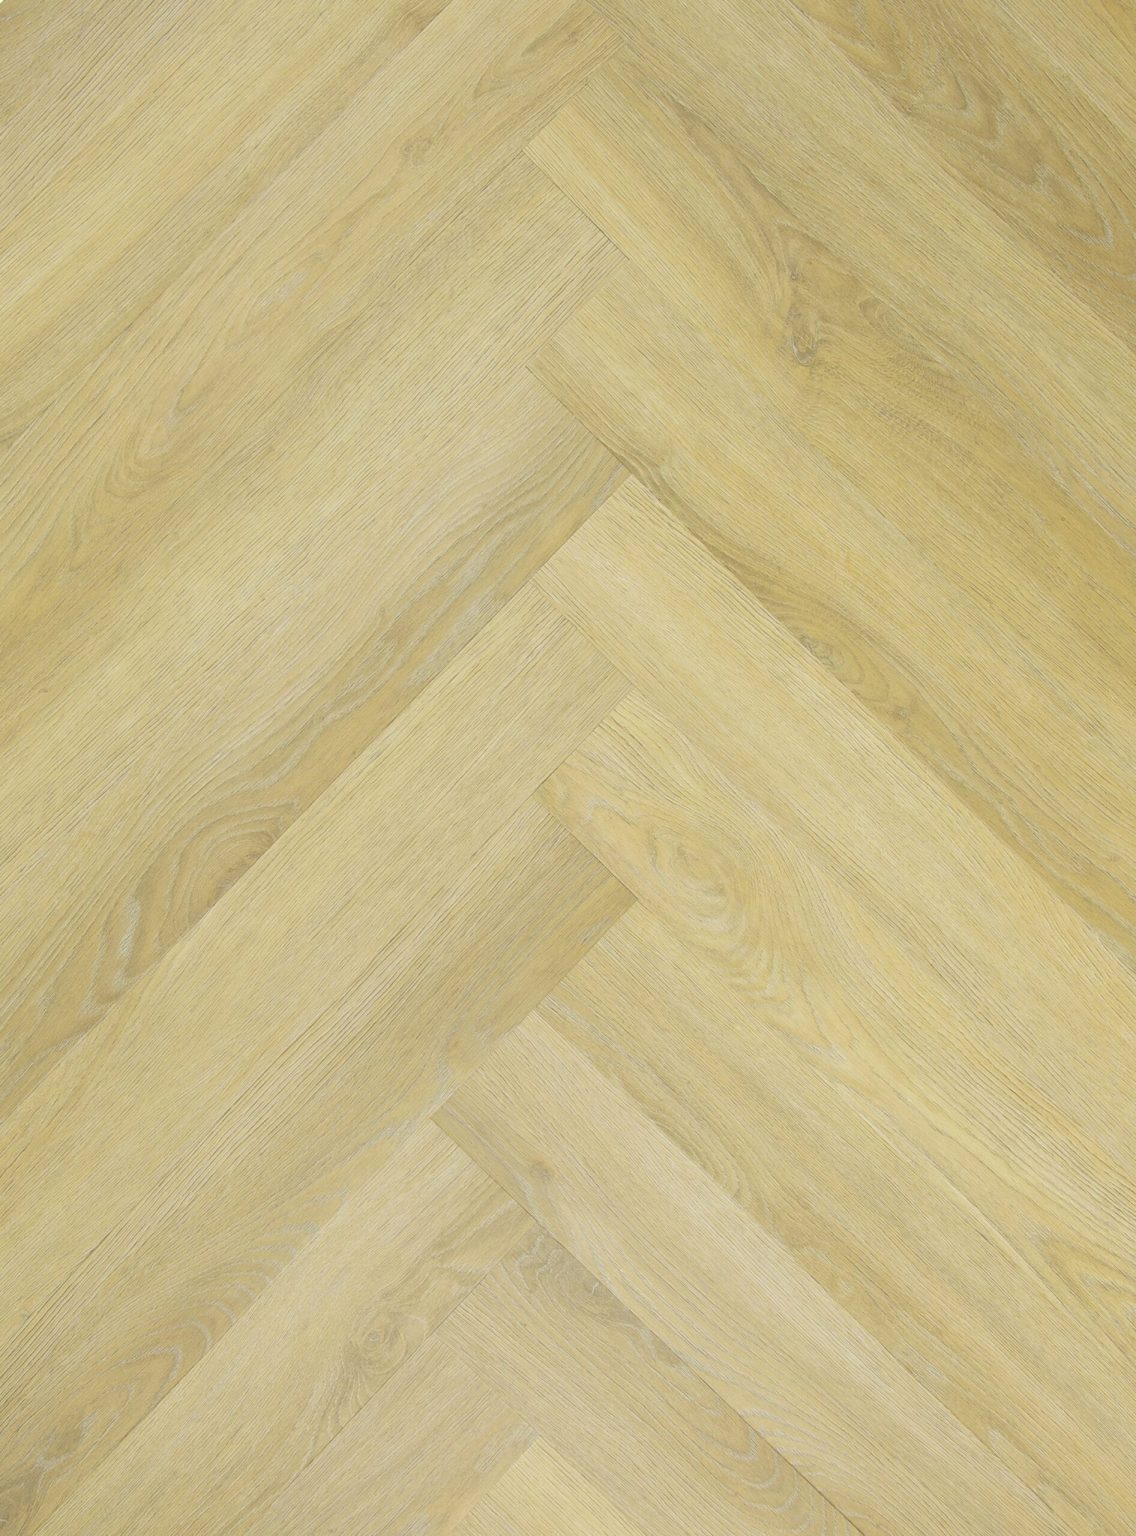 The Ossis 16 herringbone PVC floor allows you to create a sense of dynamism in any space The light pattern ensures a timeless and luxurious look in your interior